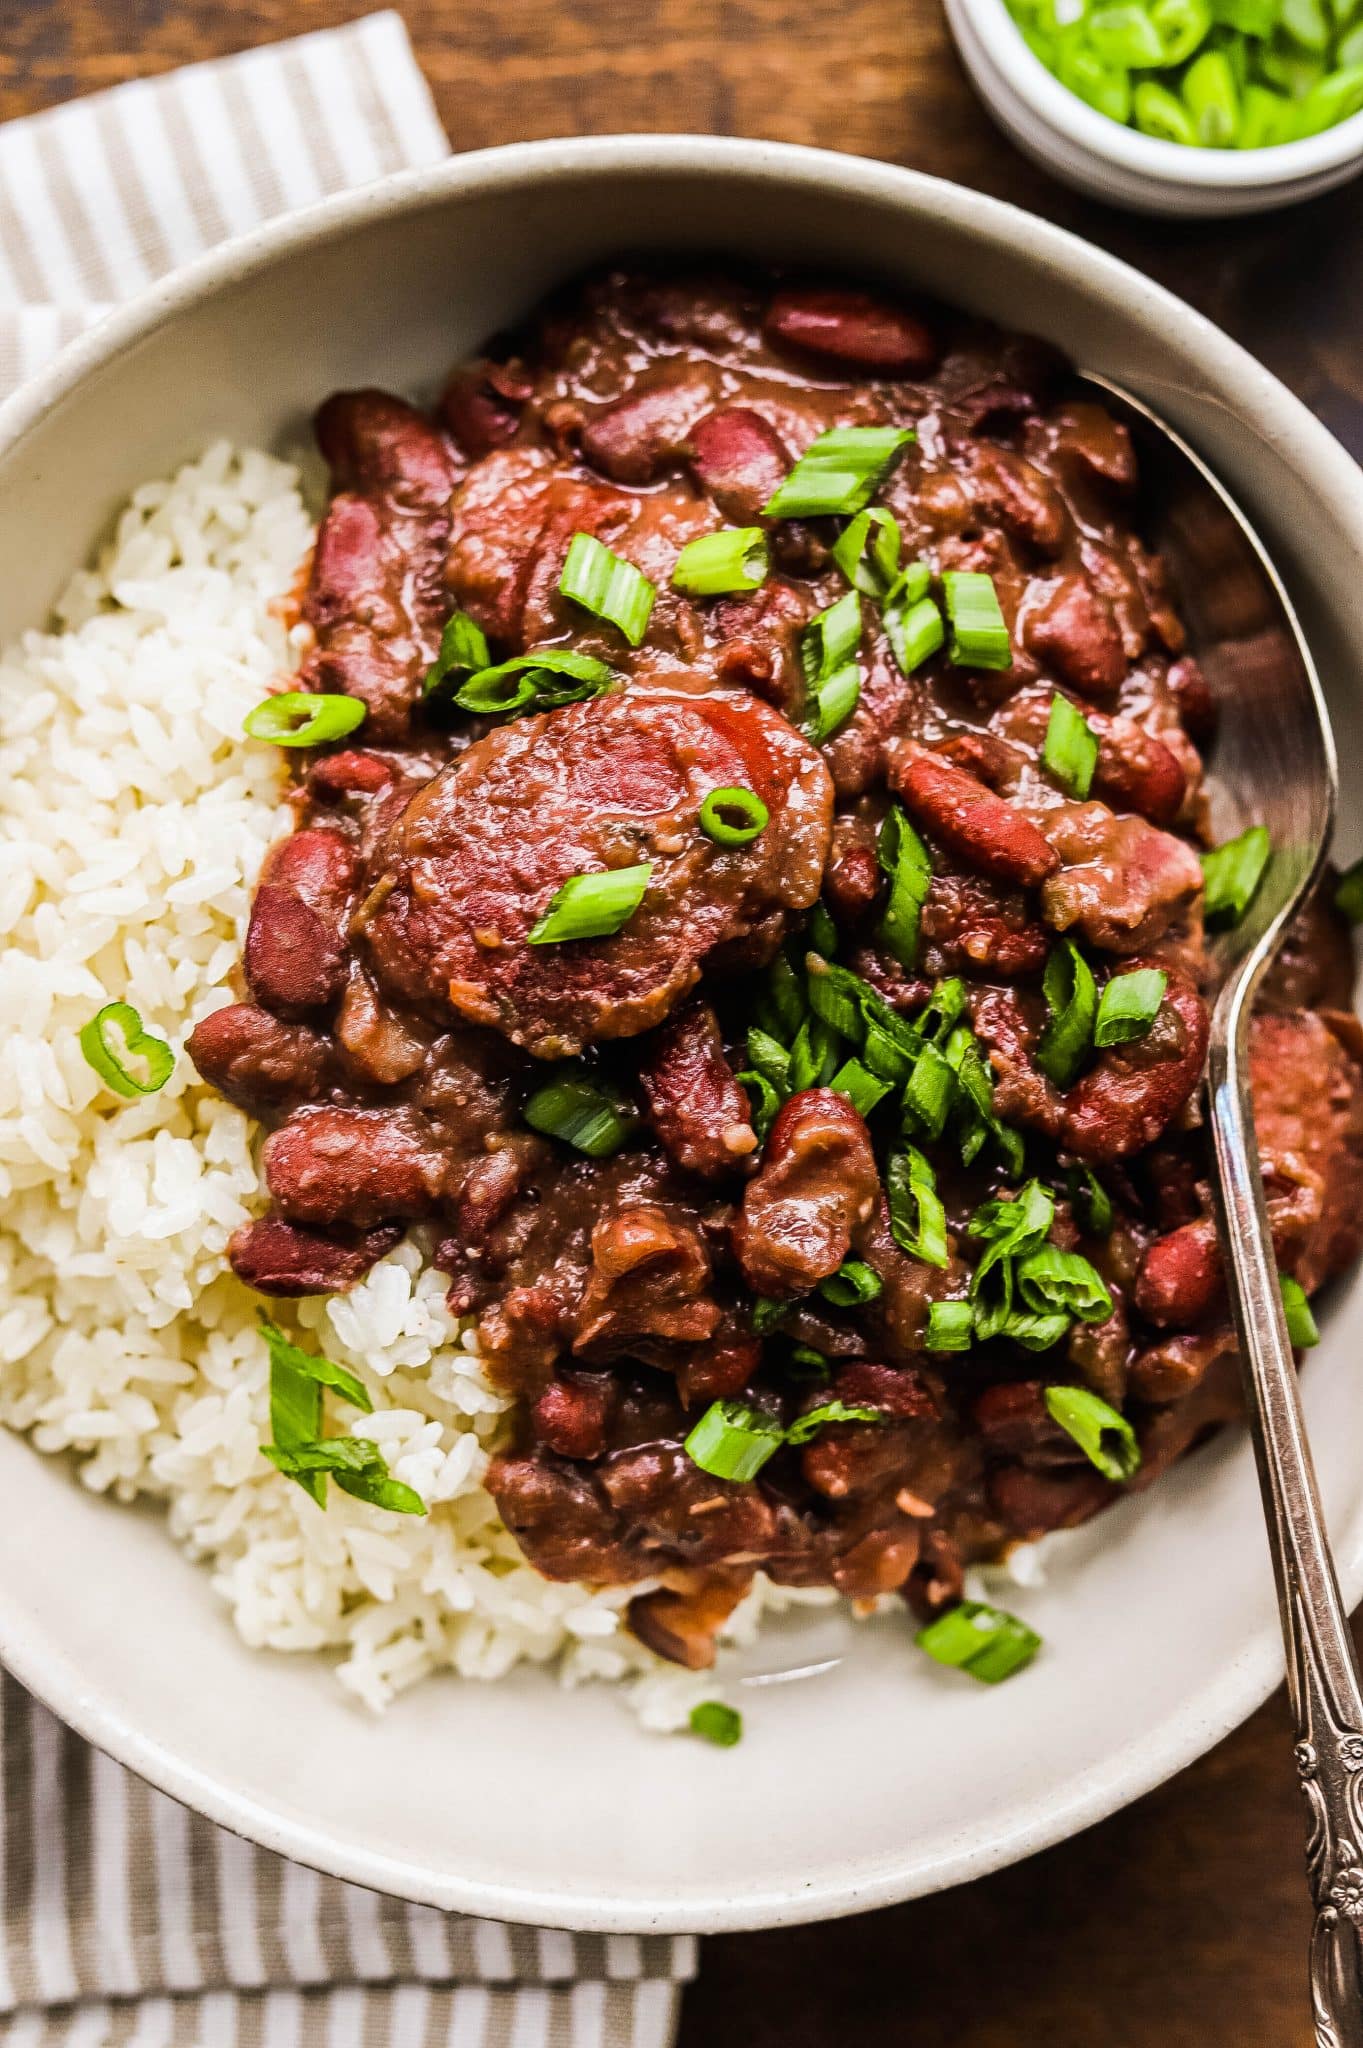 Authentic Louisiana Red Beans and Rice Recipe